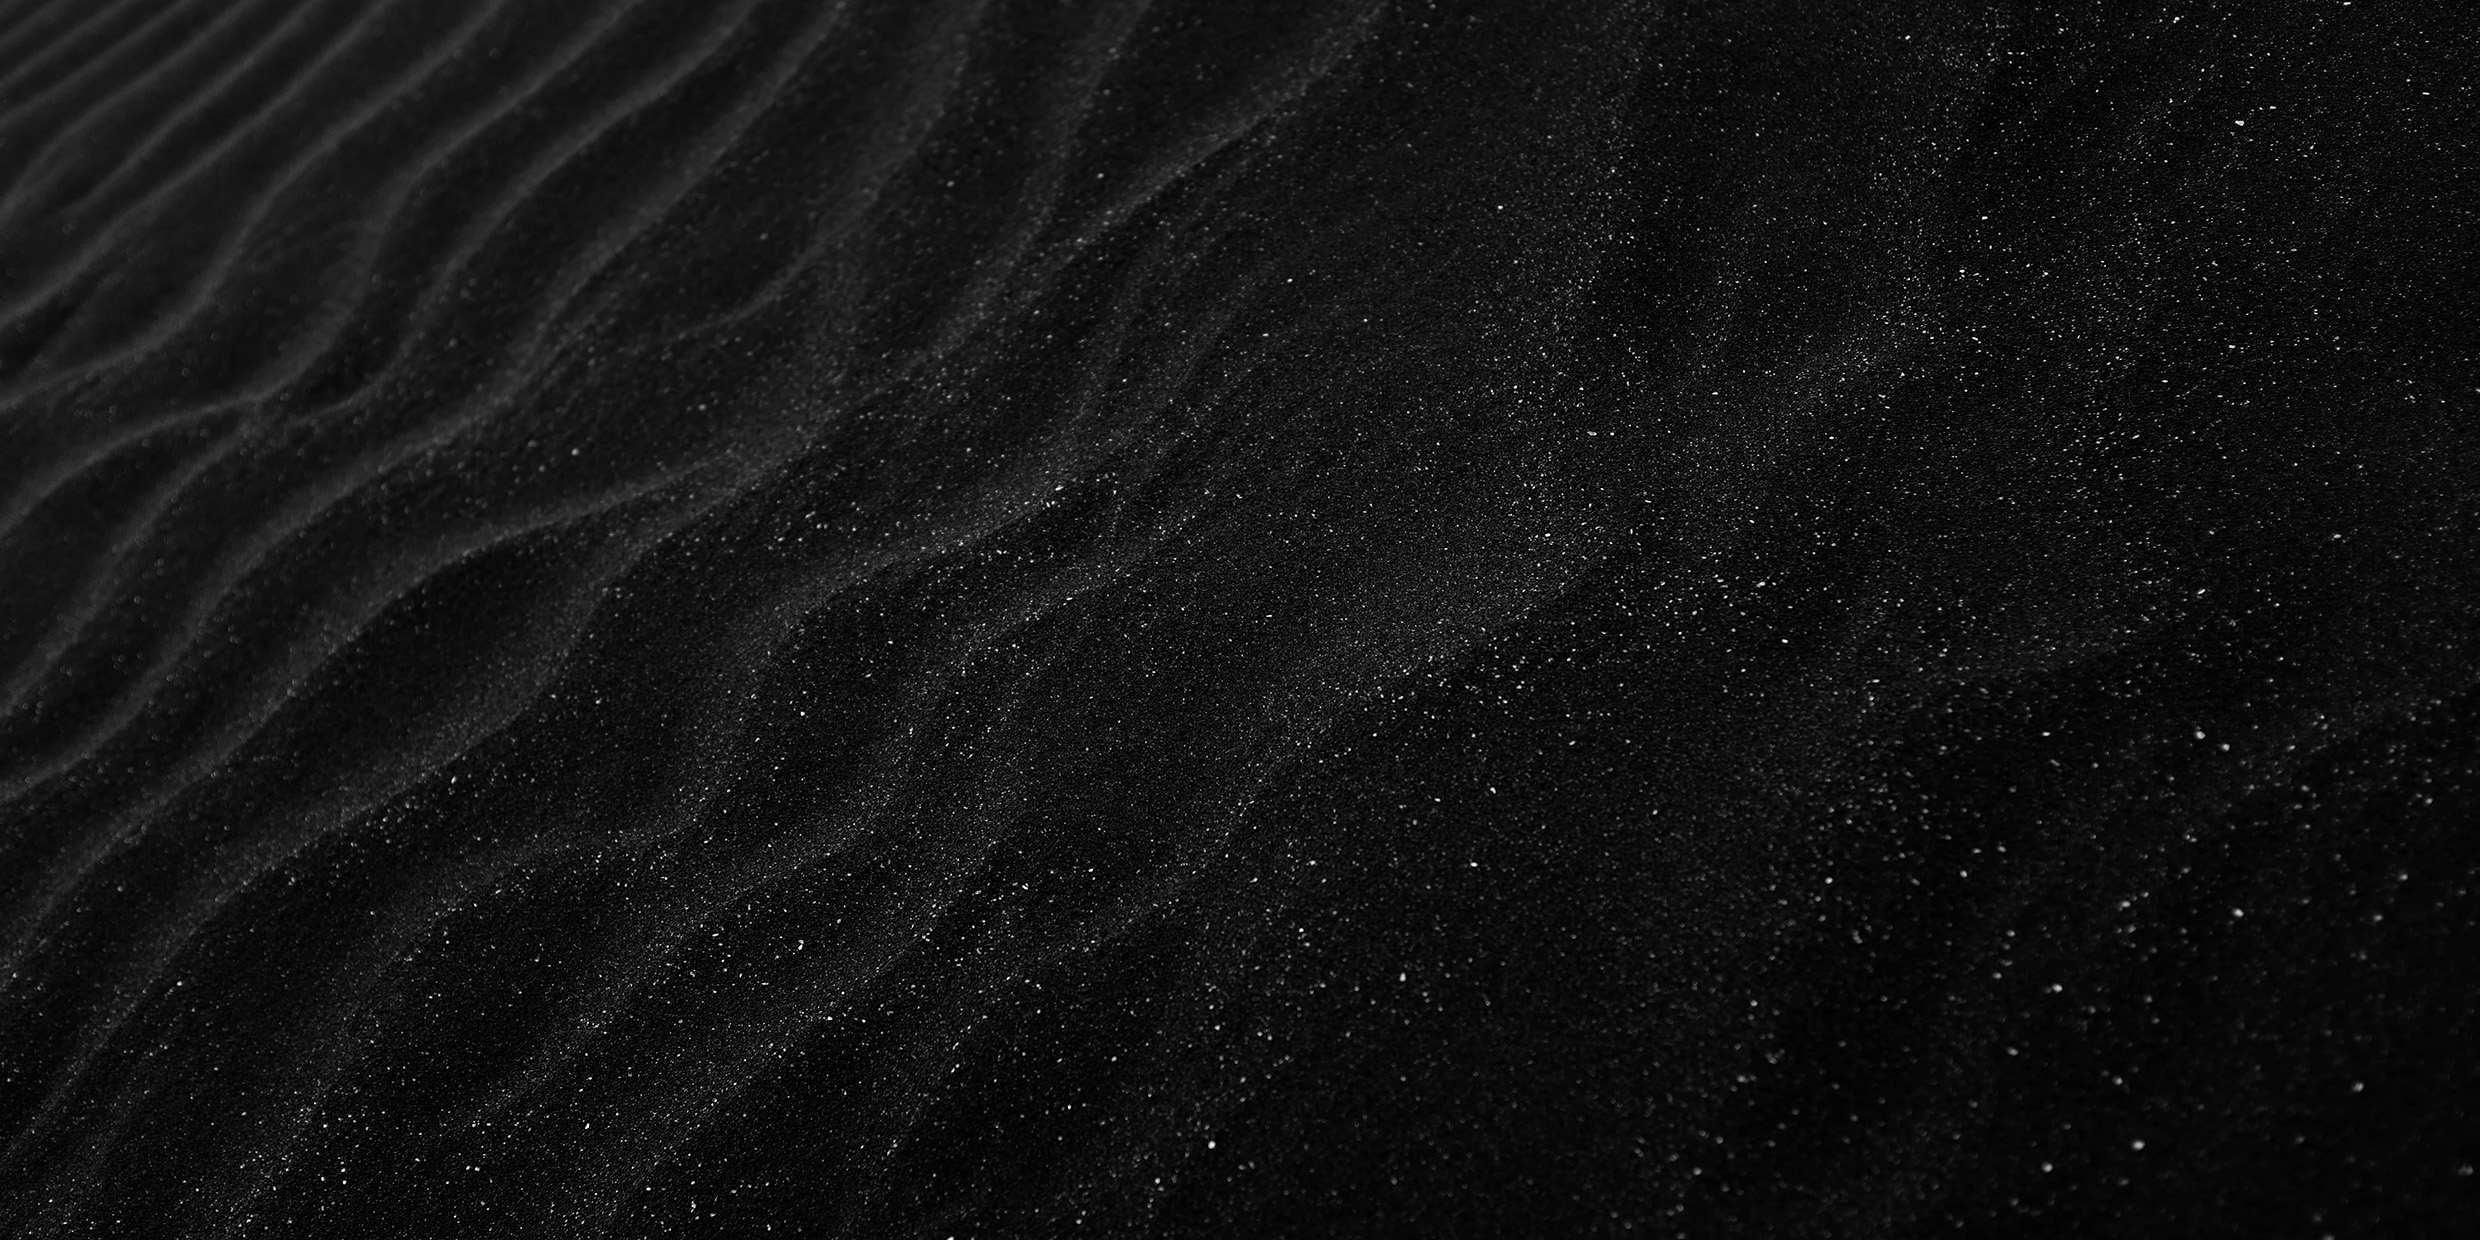 Artistic image of dark rippled sand and pinpoints of light